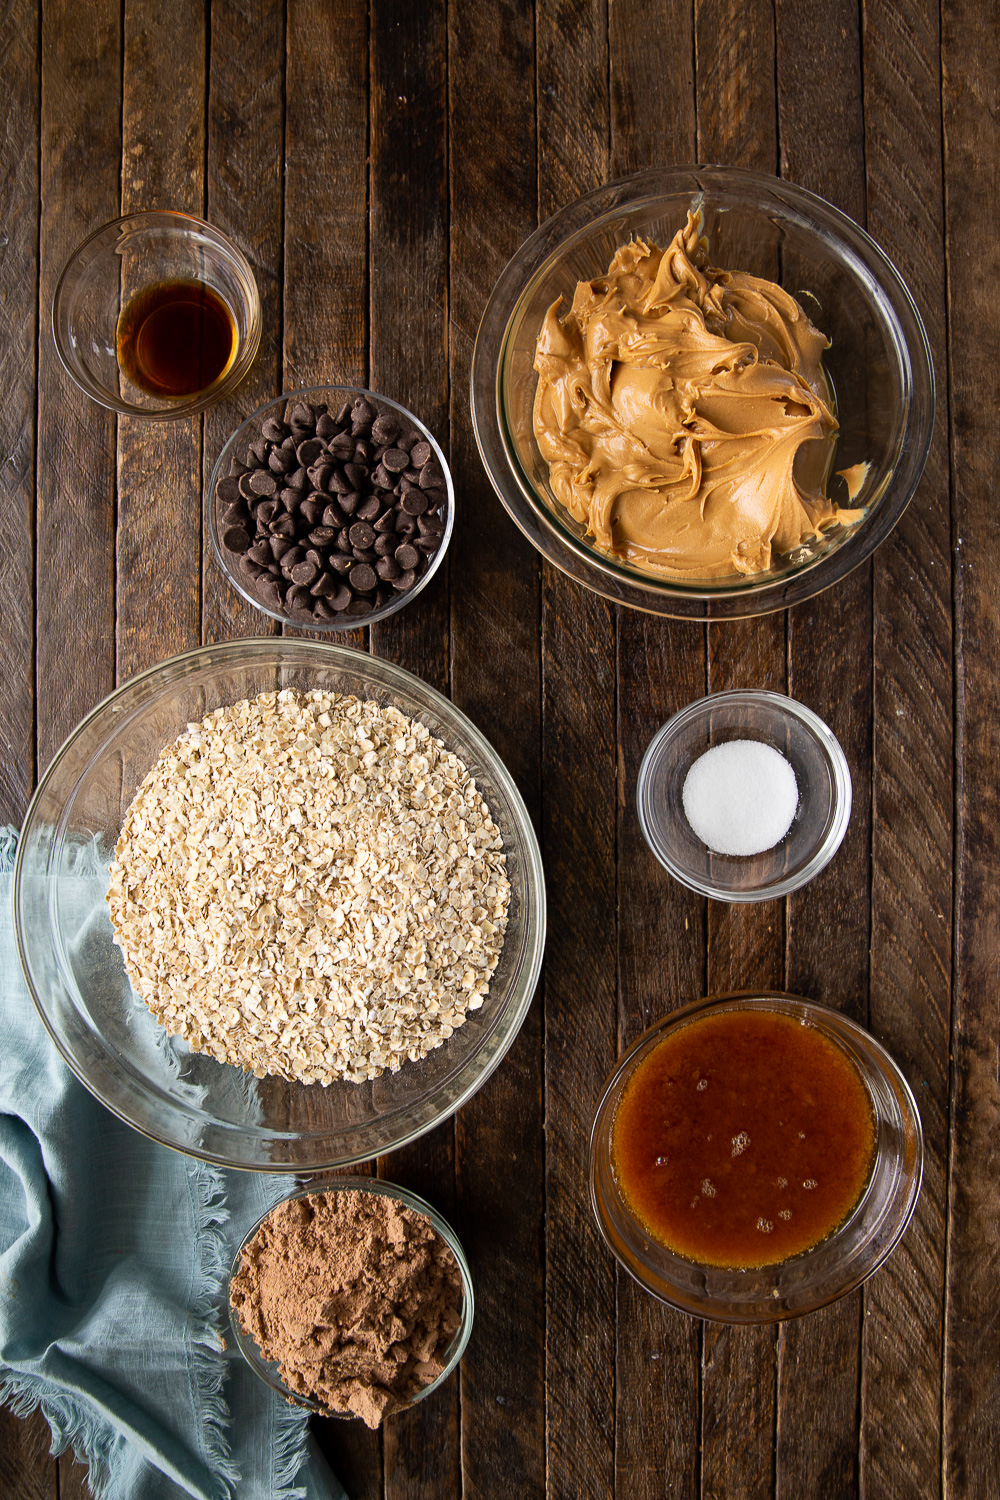 The ingredients needed to make chocolate peanut butter protein balls